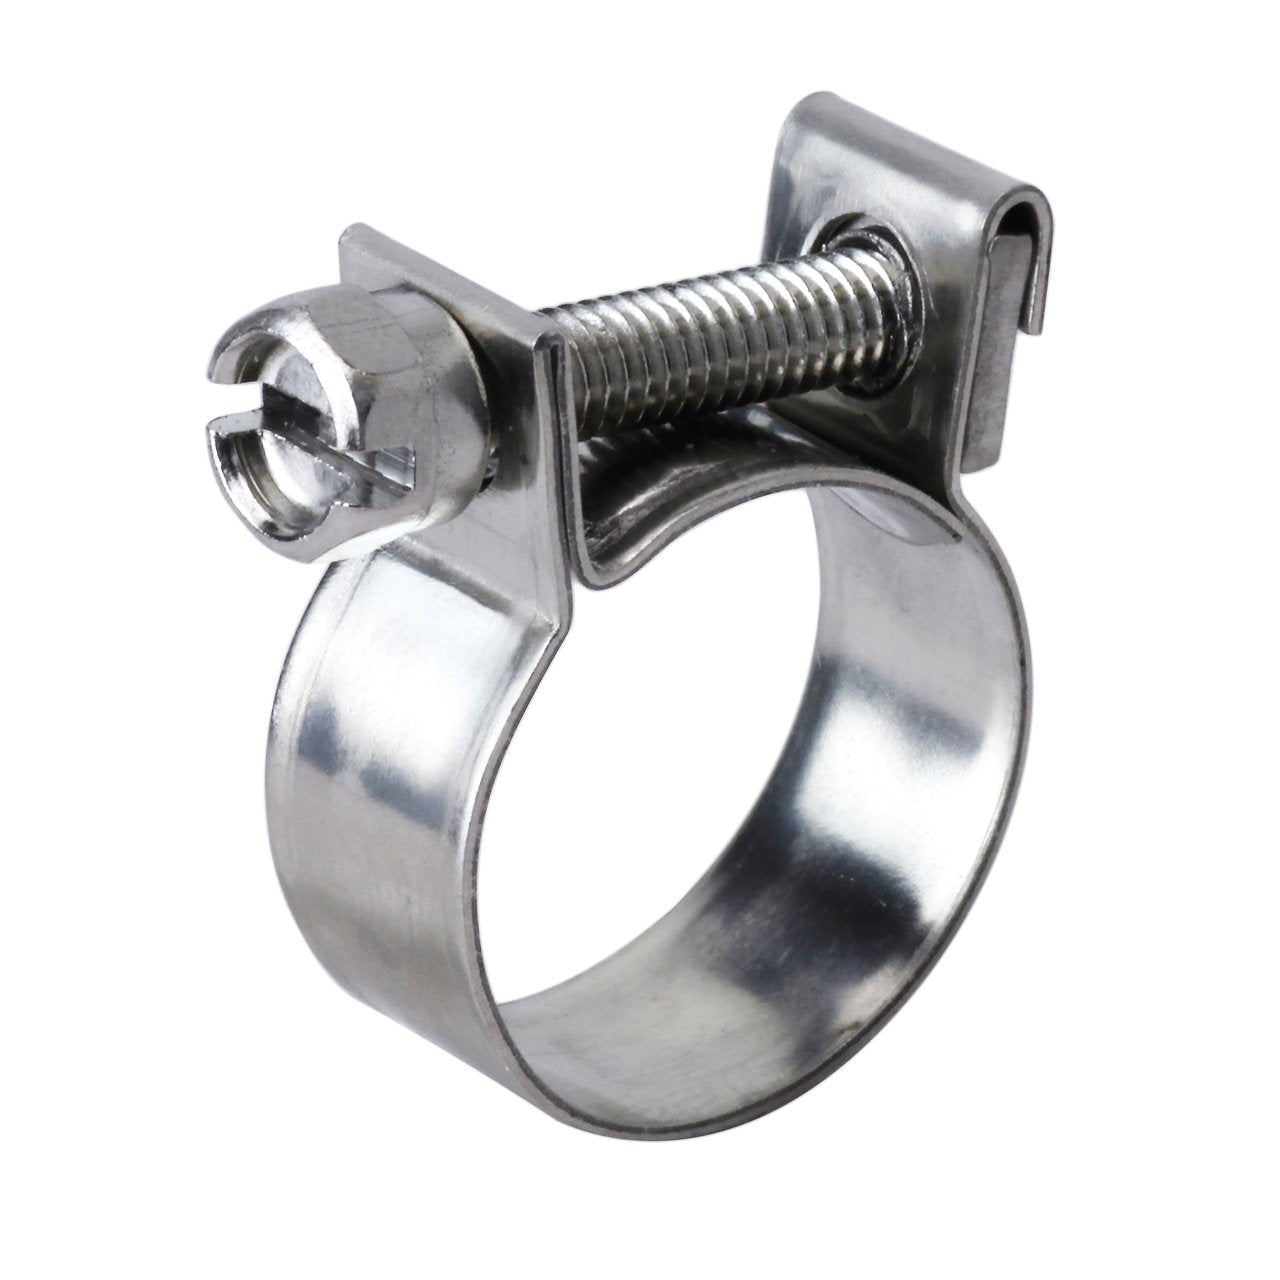 HPS Size # 17 Stainless Steel Fuel Injection Hose Clamp, Range: 19/32 -  43/64 (15mm - 17mm)